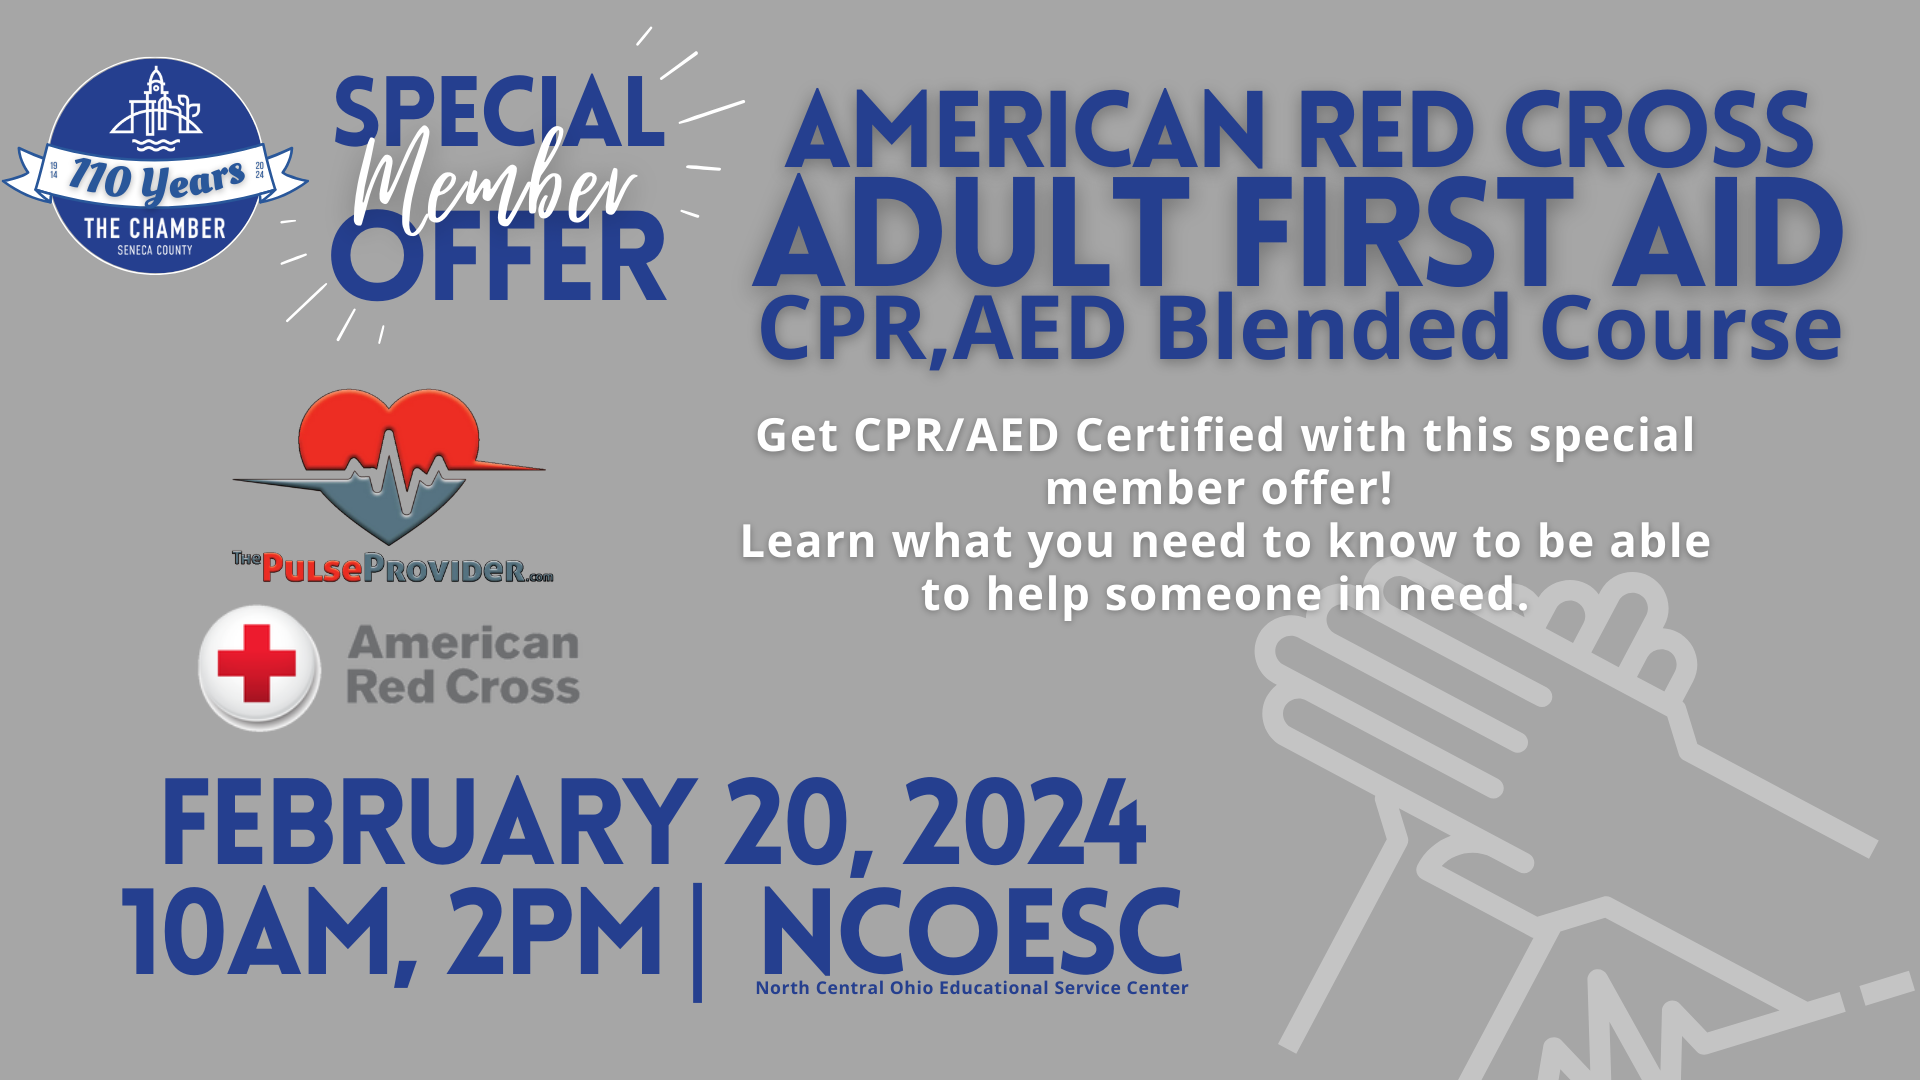 Special Member Offer | Adult First Aid, CPR, AED Blended Course